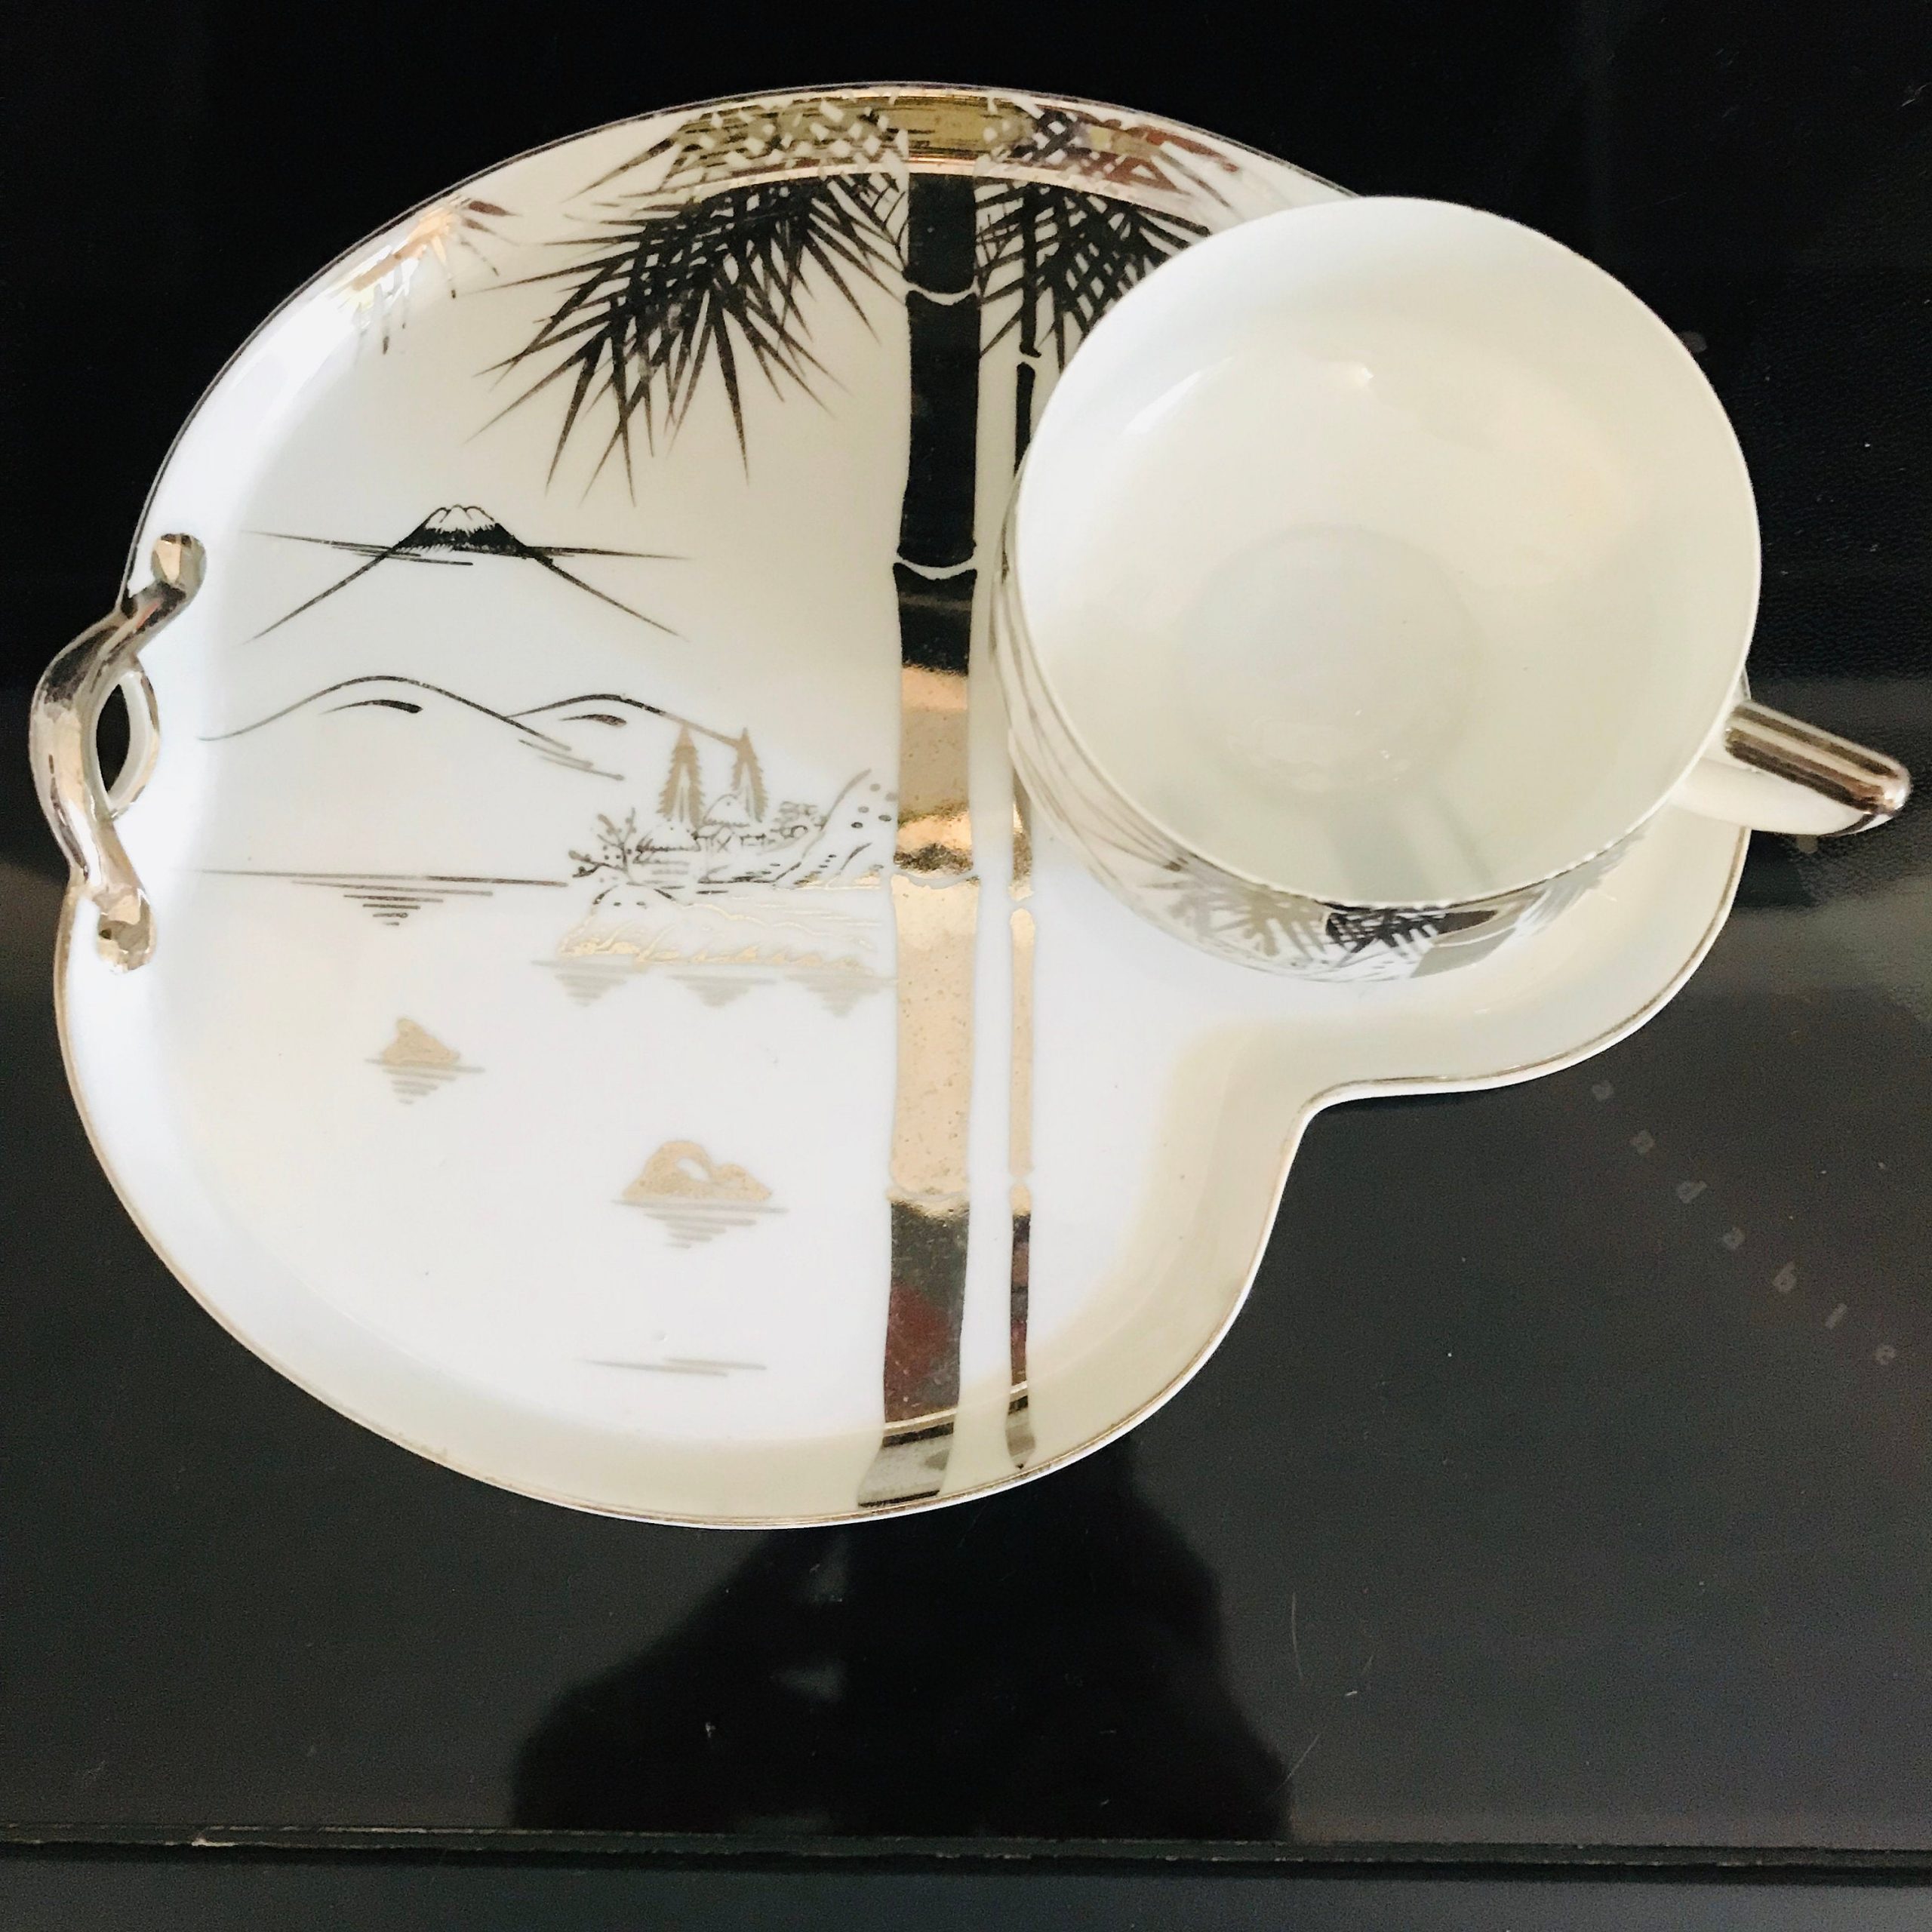 https://www.truevintageantiques.com/wp-content/uploads/2019/12/vintage-hakusan-japan-tea-cup-and-saucer-snack-plate-fine-bone-china-white-with-silver-asian-scene-farmhouse-collectible-display-cottage-5e0559bf6-scaled.jpg